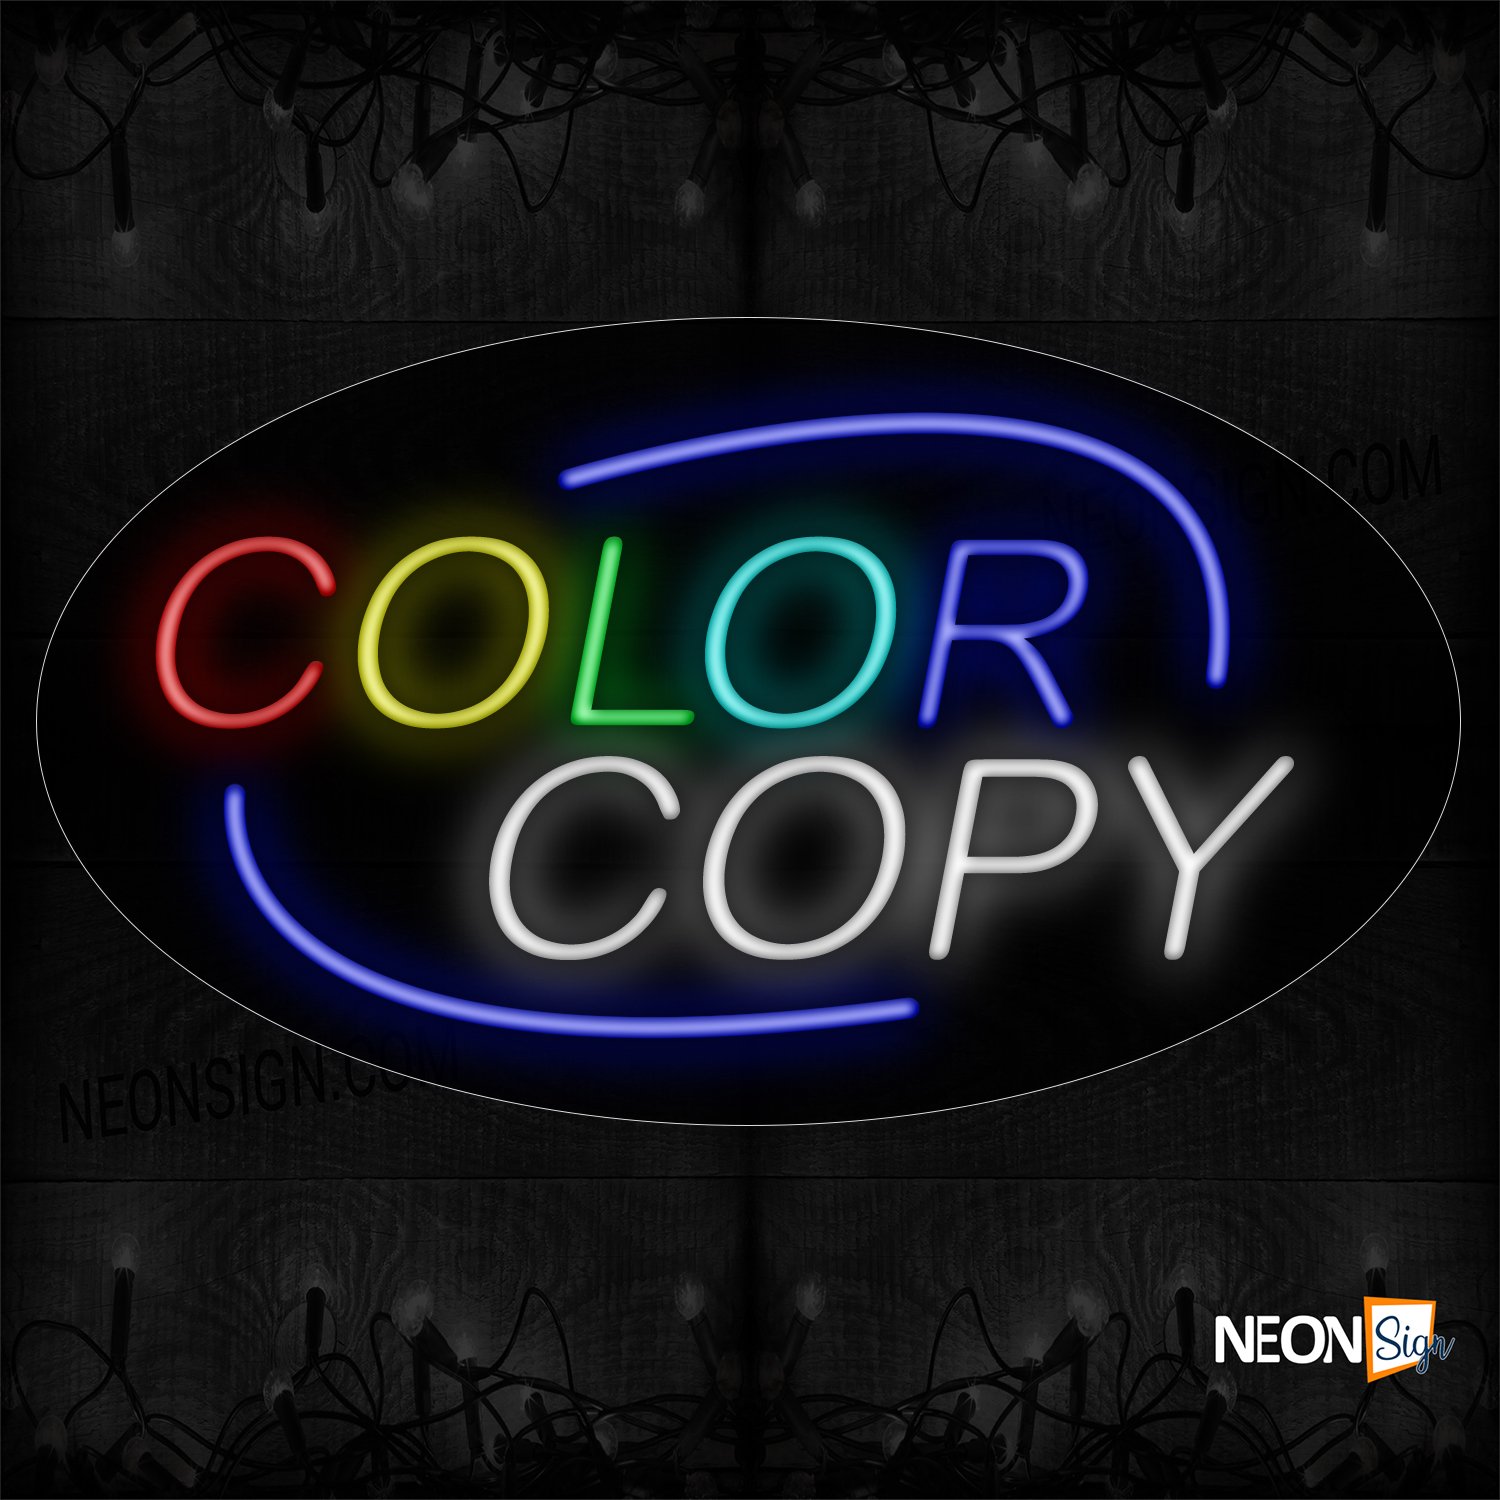 Image of 14095 Color Copy With Arc Border Neon Signs_17x30 Contoured Black Backing